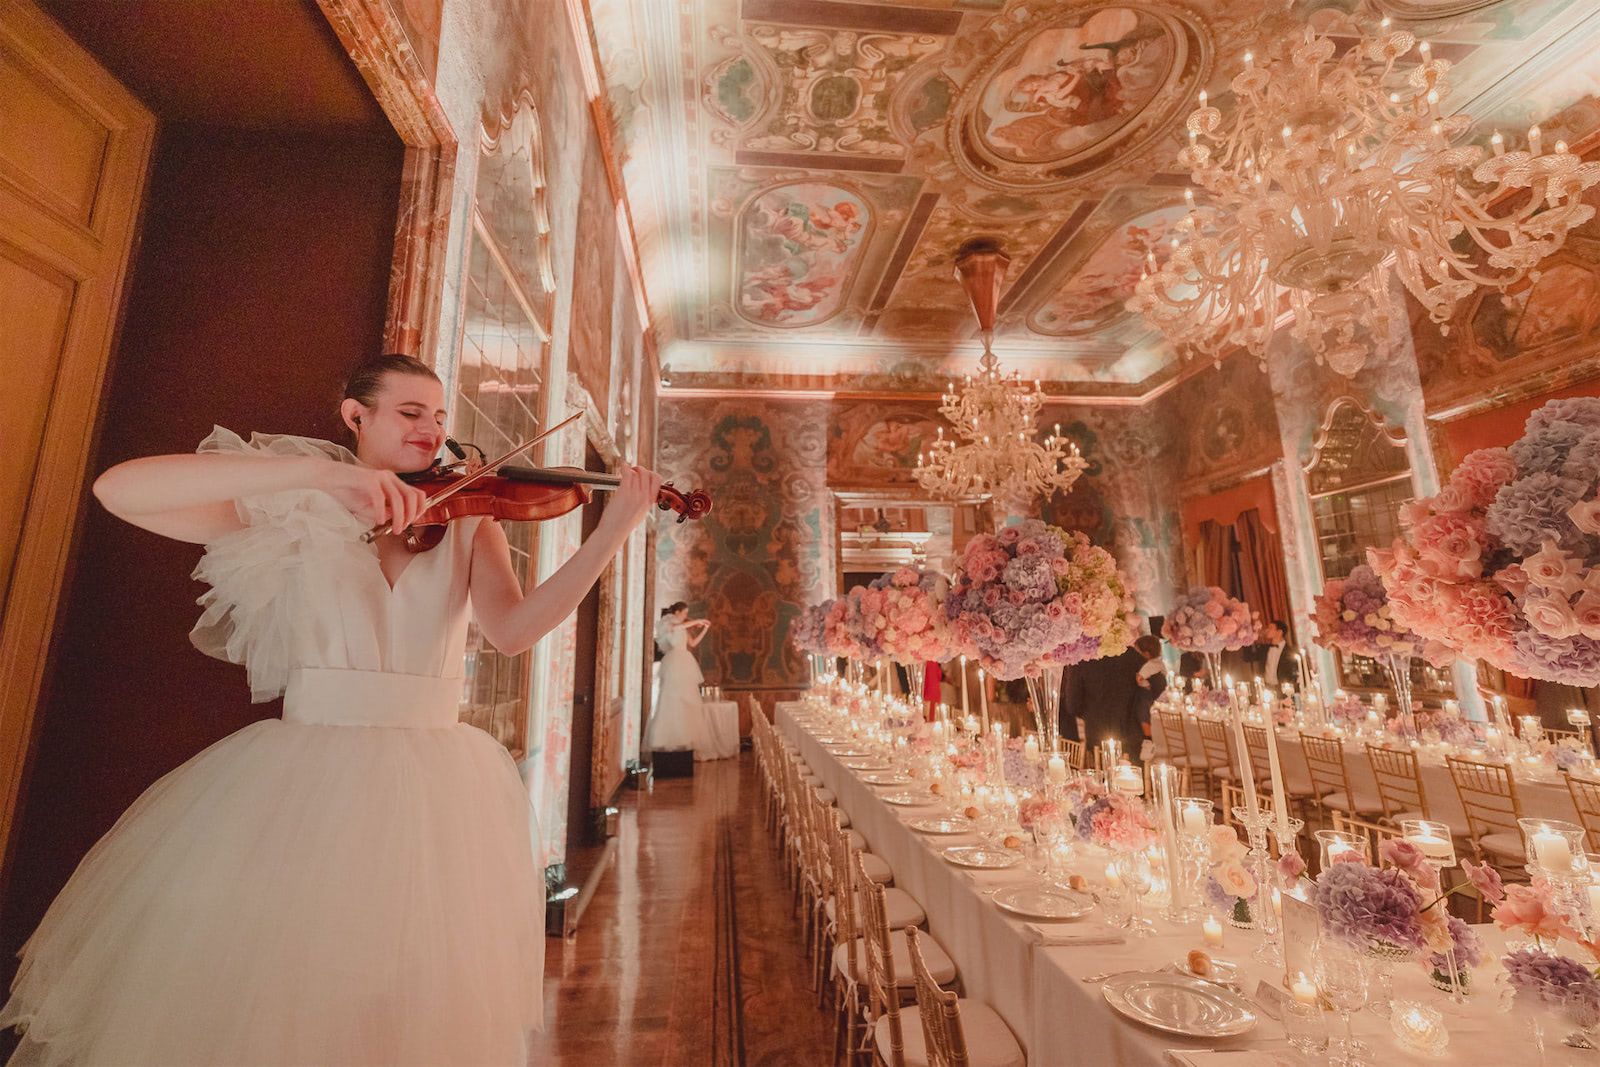 Entertainment is a big part of any luxurious destination wedding.